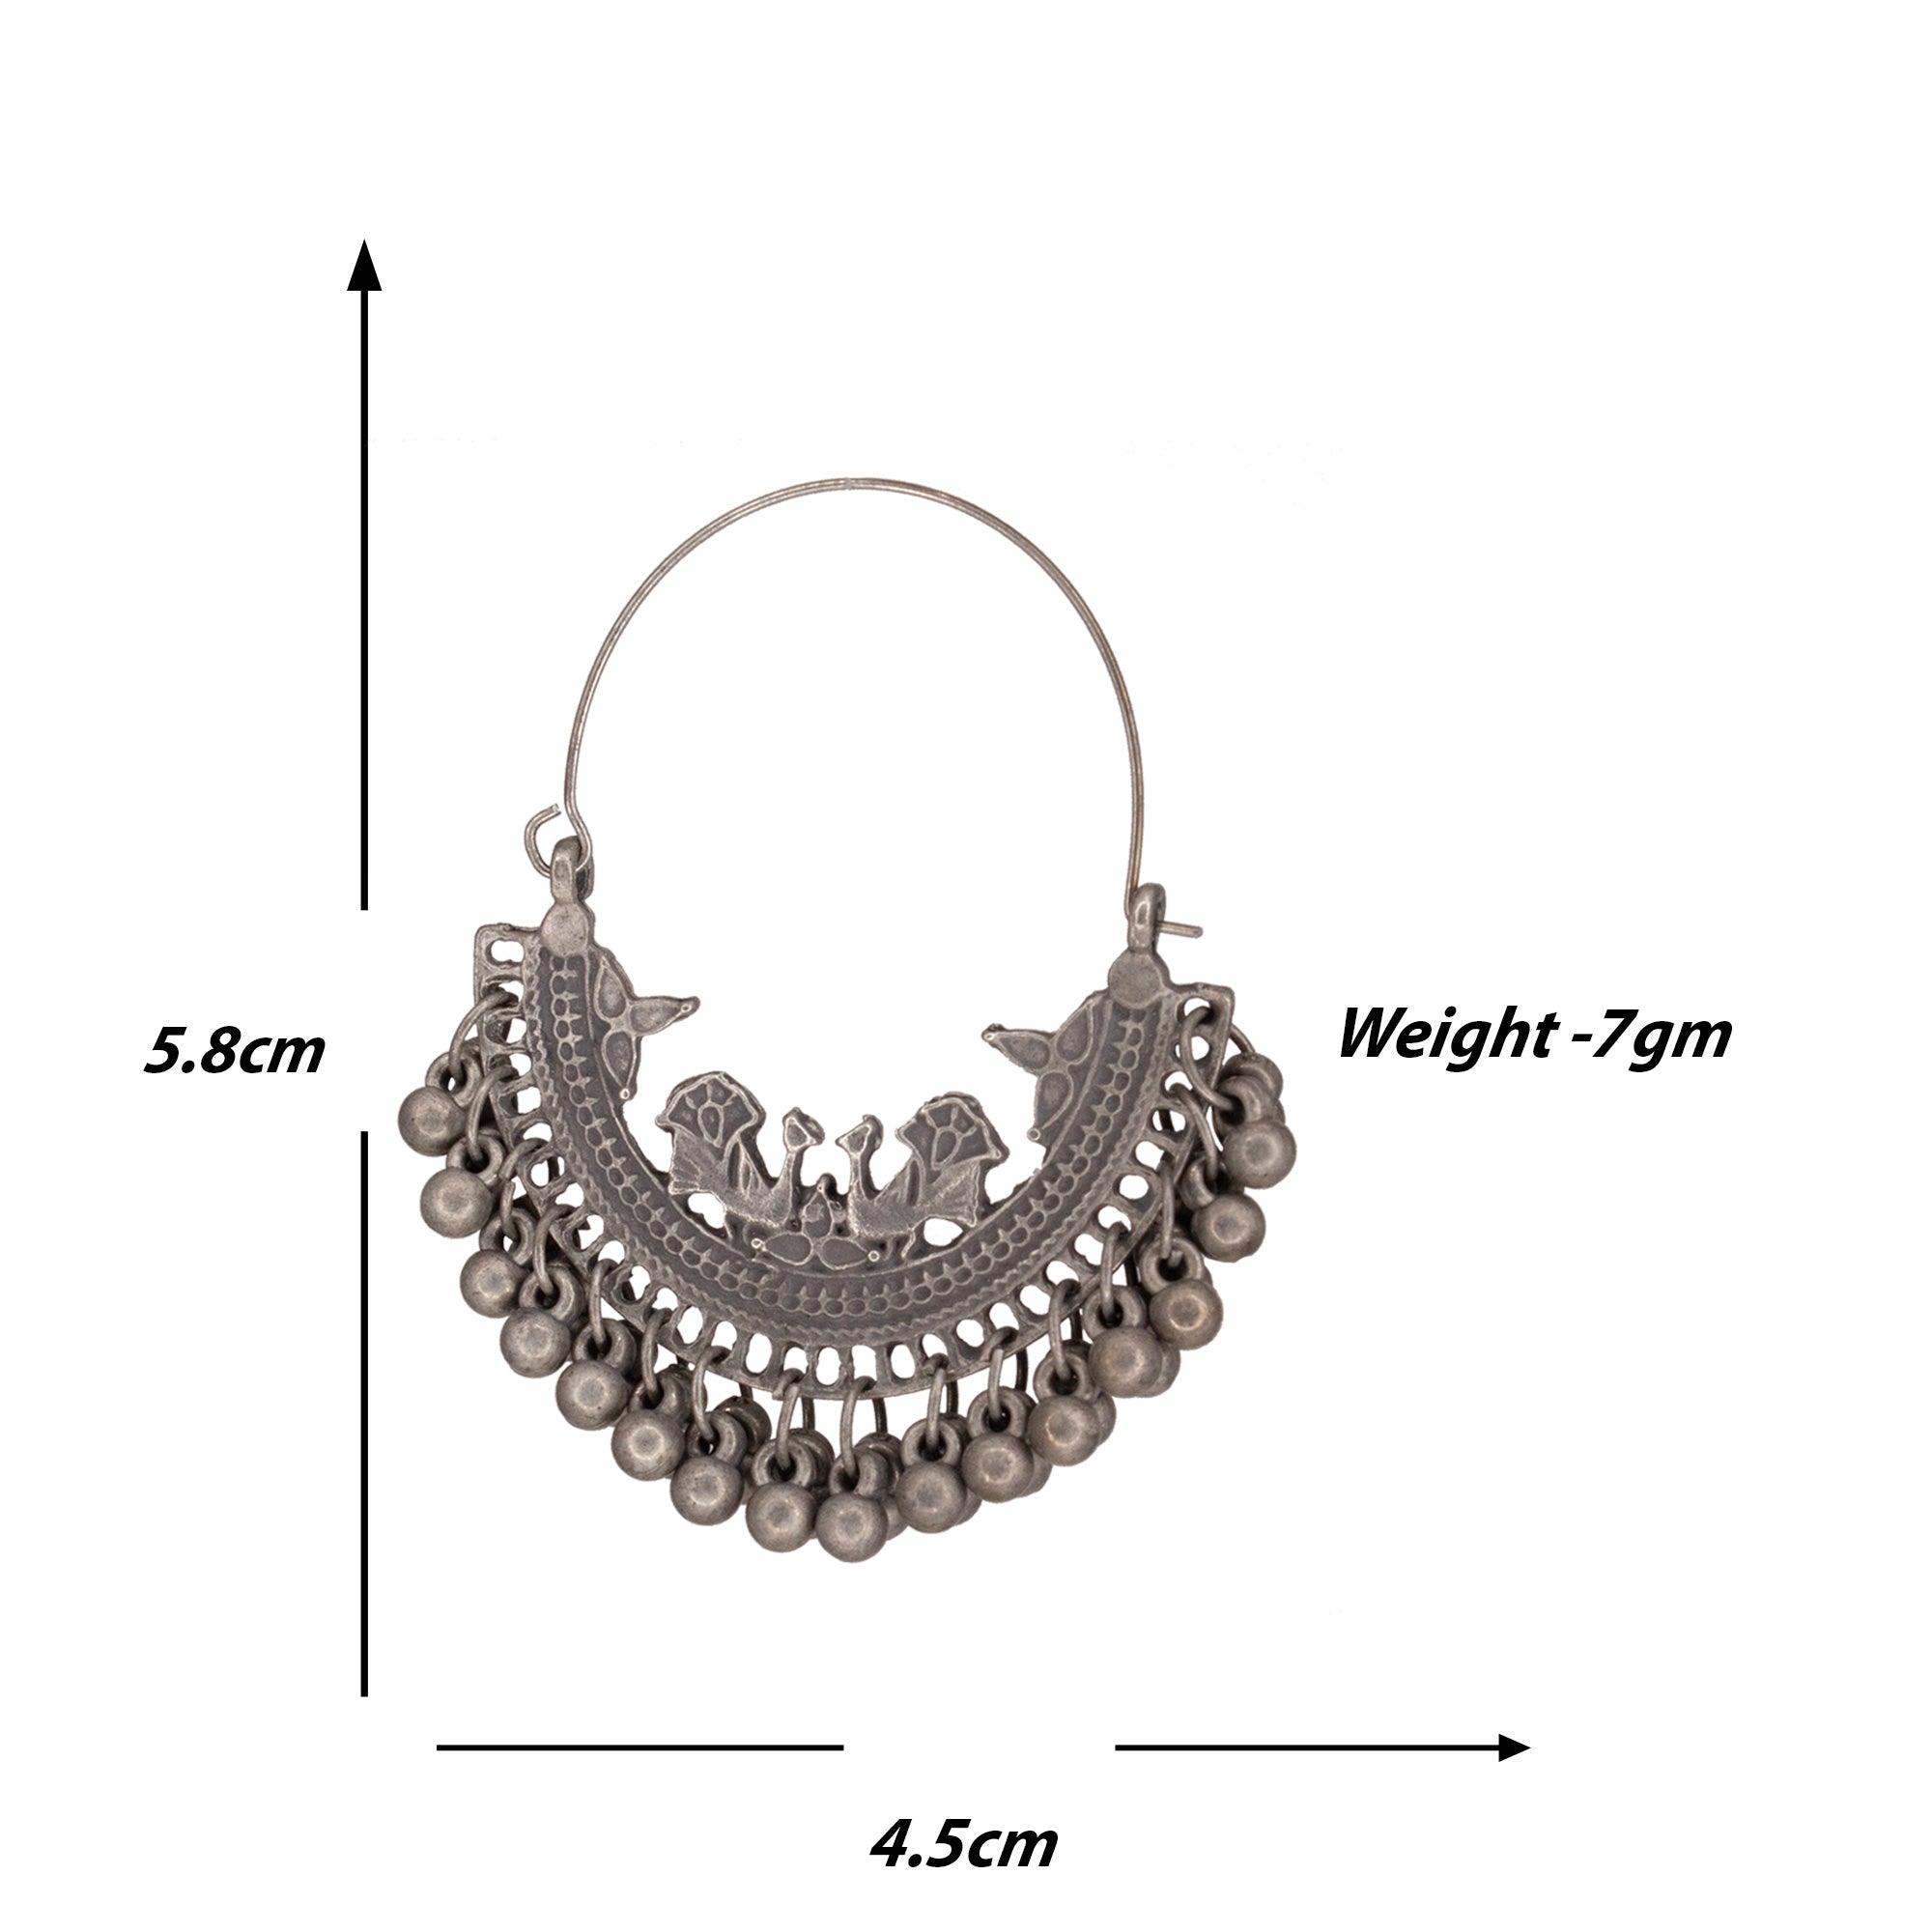 Abhinn Antique Finished Oxidised Floral And Peacock Design Hoop Earrings For Women